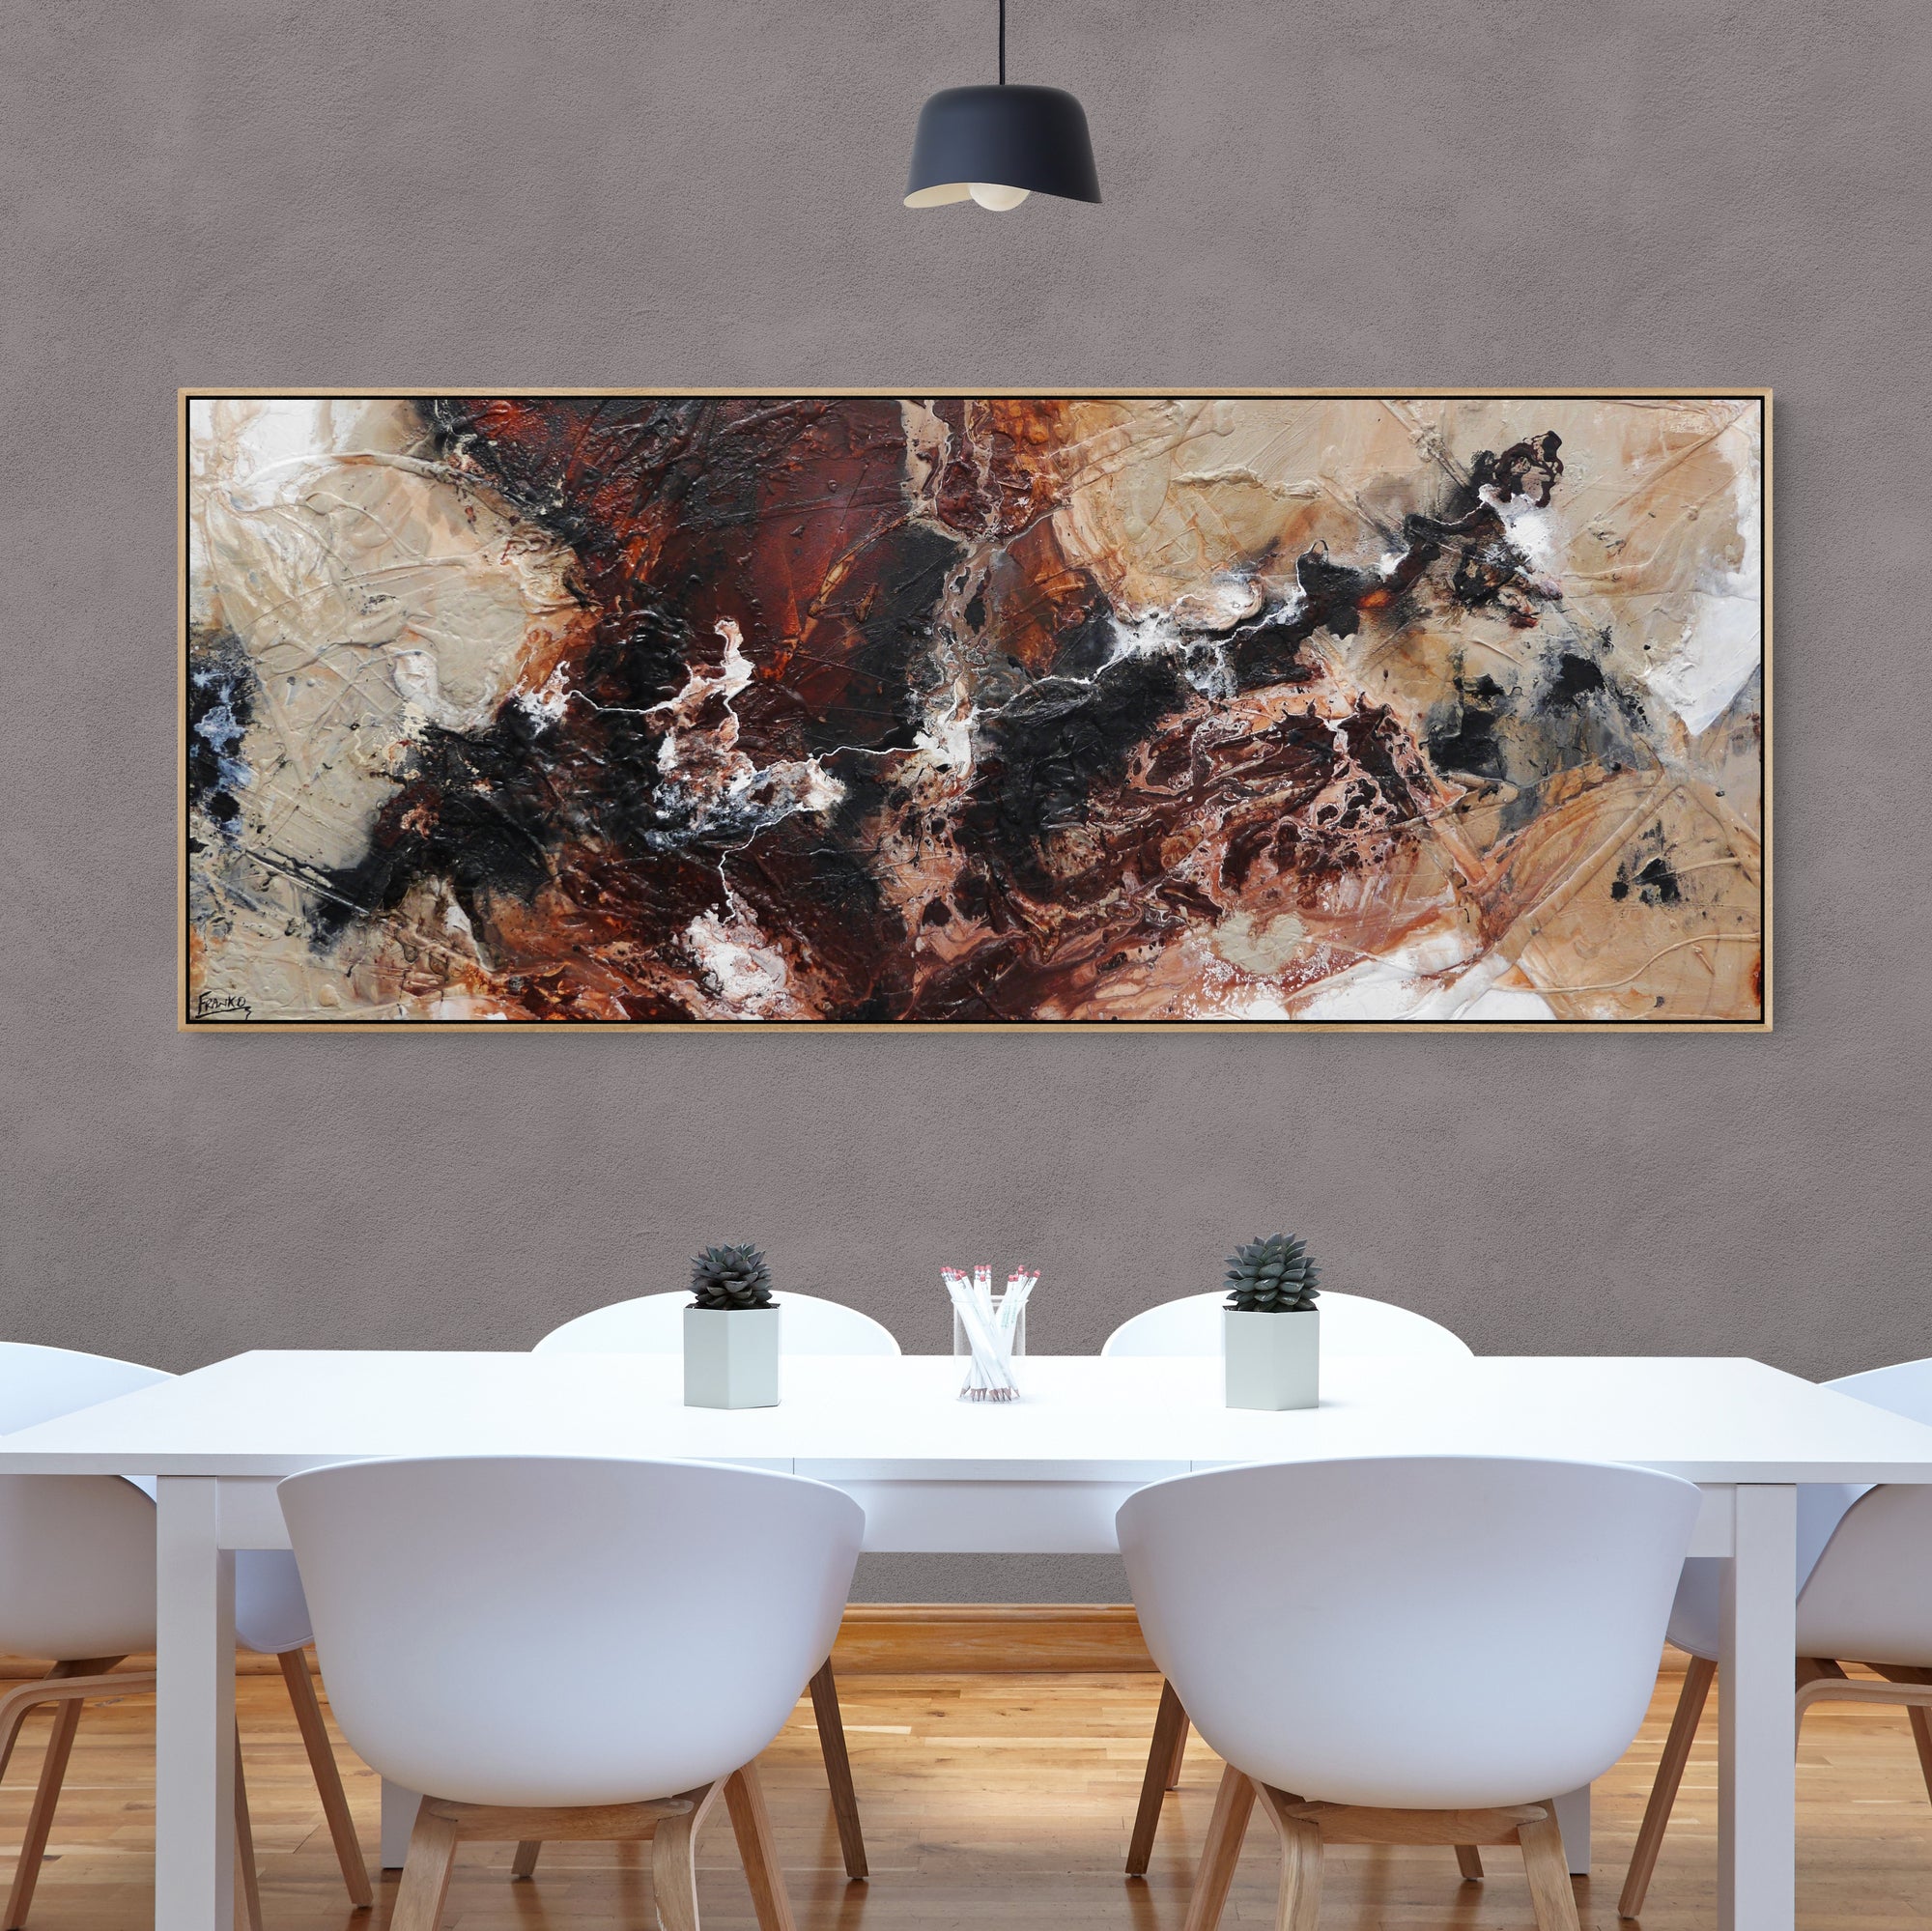 Intervention 200cm x 80cm Umber Brown Grey Bone Black White Textured Abstract Painting (SOLD)